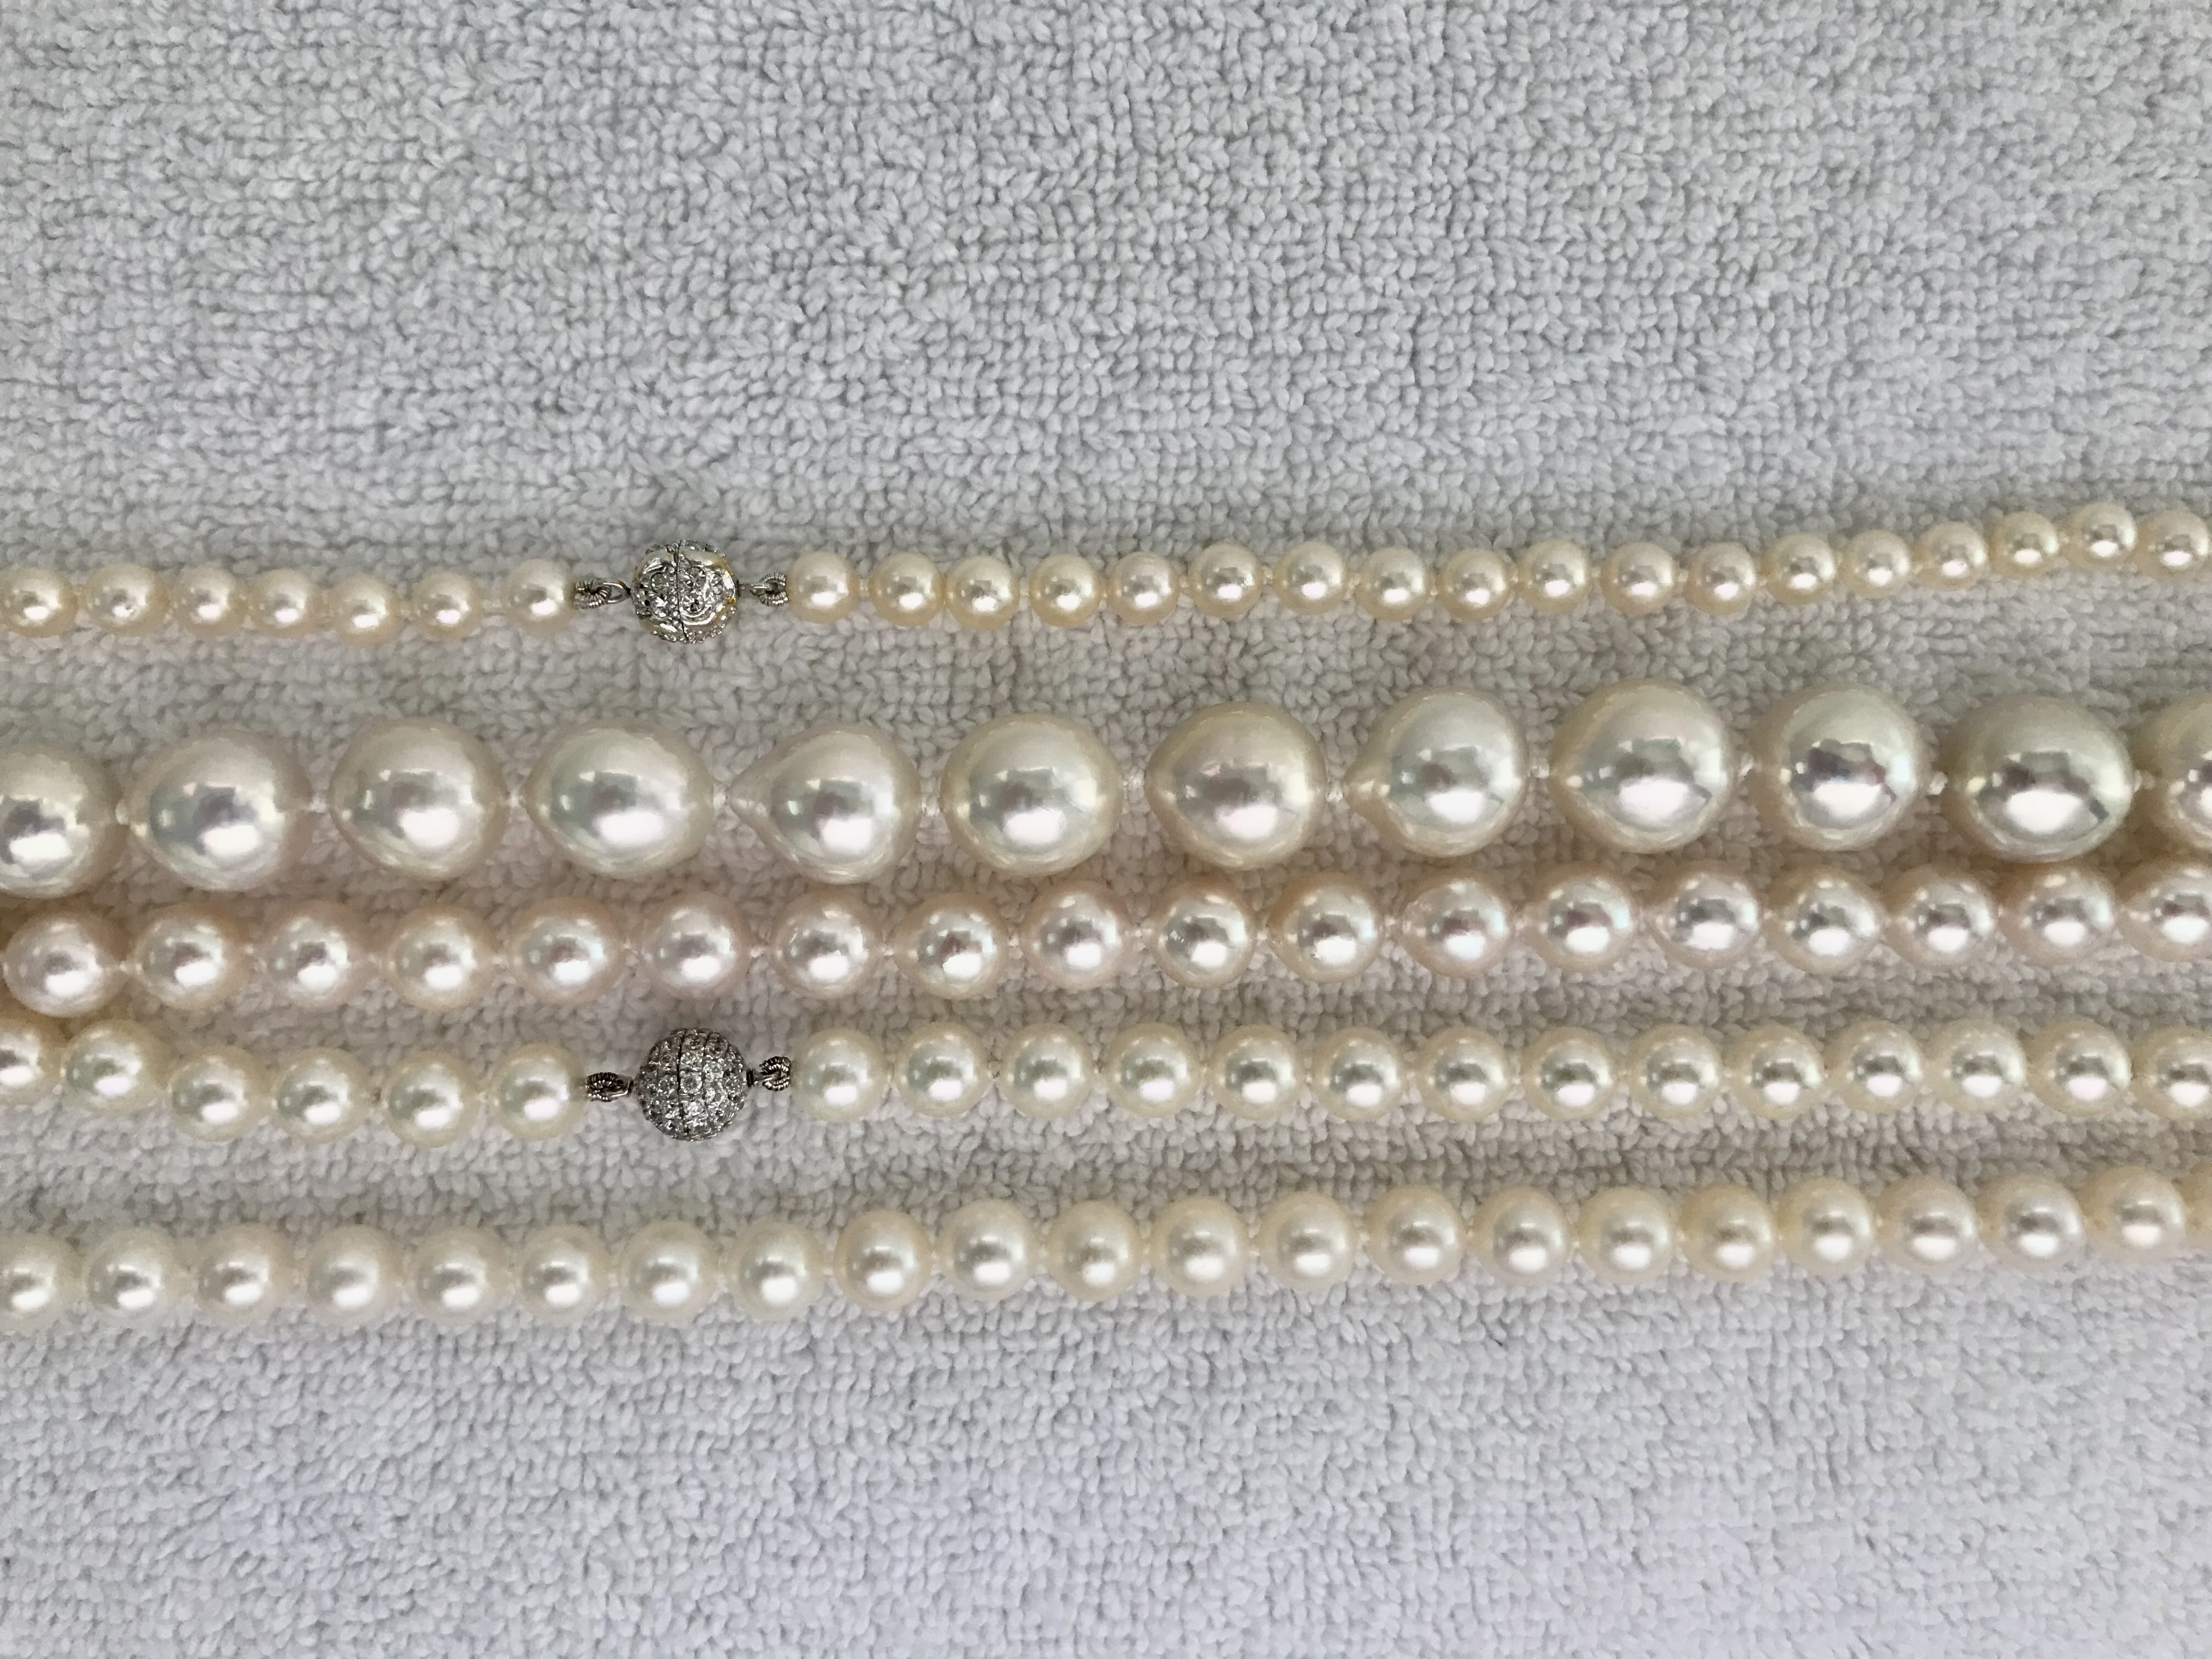 Top: First akoya bought in 1982 Second: Big baroque freshwater from Kojima Third: Baroque akoyas from Pearl Paradise Fourth: Natural white Hanadama rope from Pearl Paradise Fifth: Freshadamas from Pearl Paradise